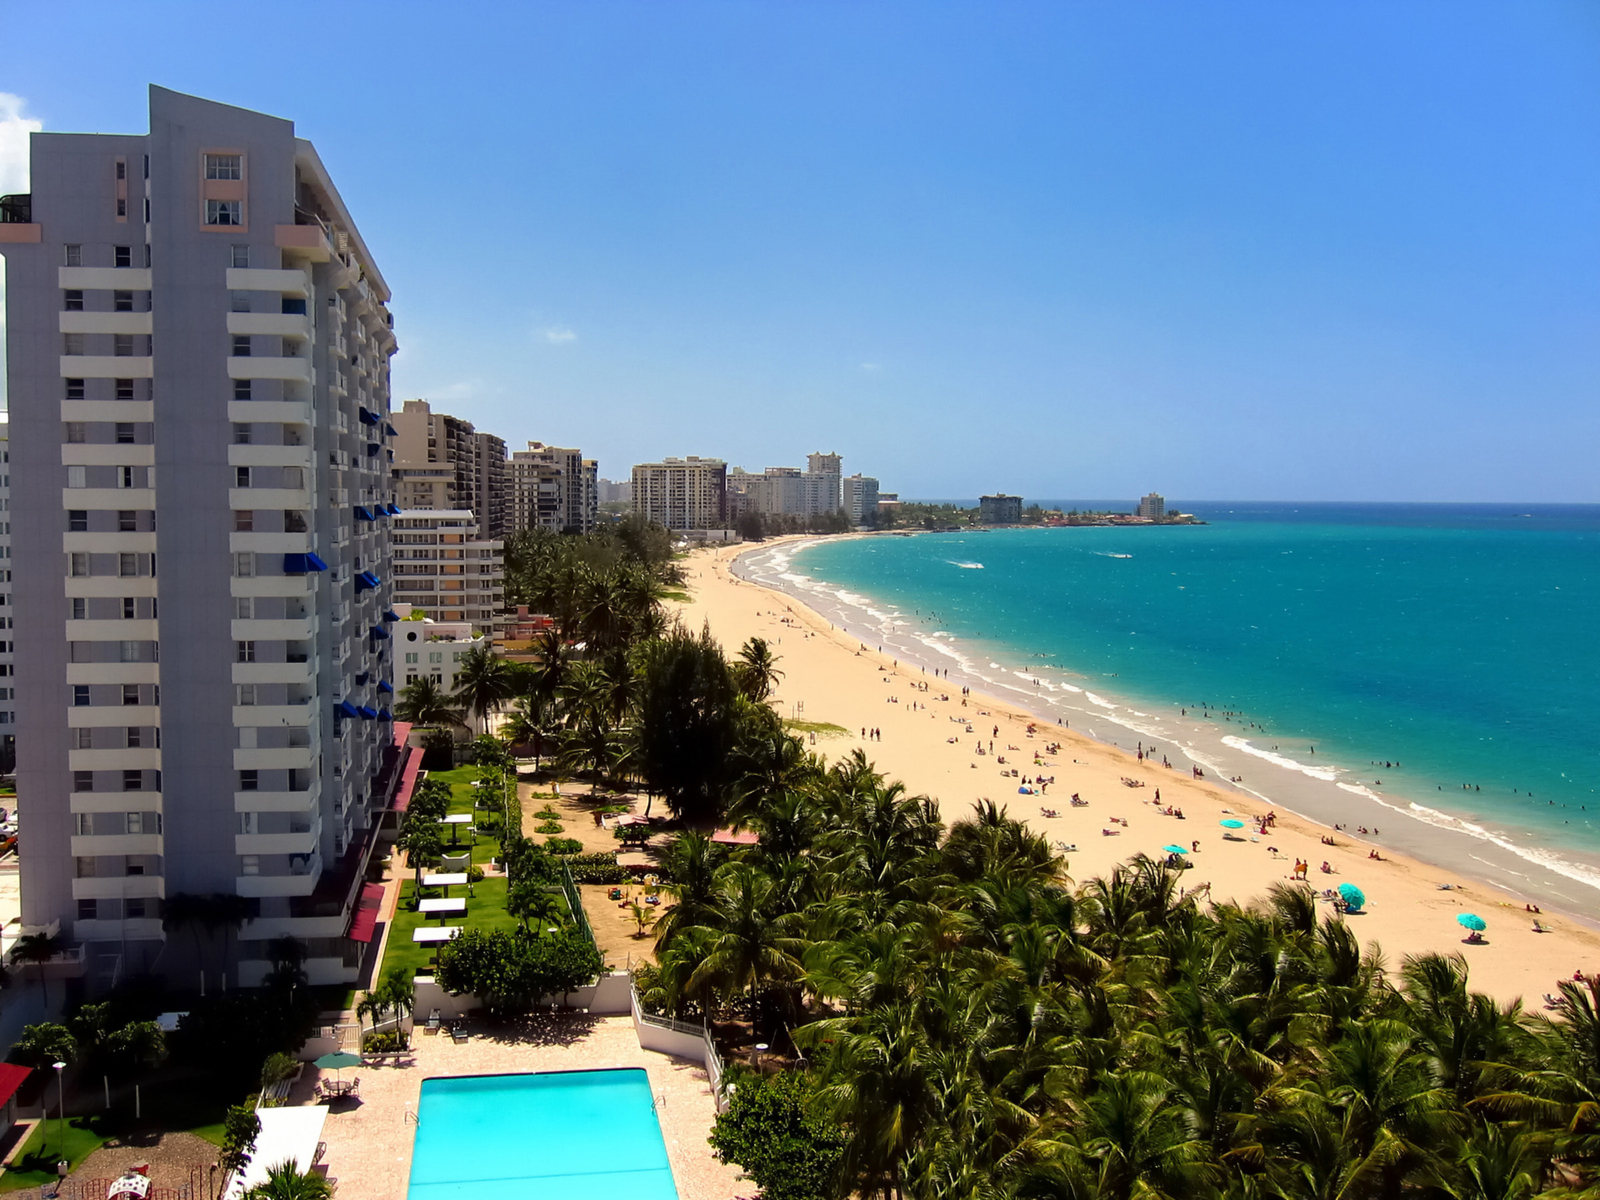 Gorgeous view from a resort room in Isla Verde, one of the best beaches in Puerto Rico